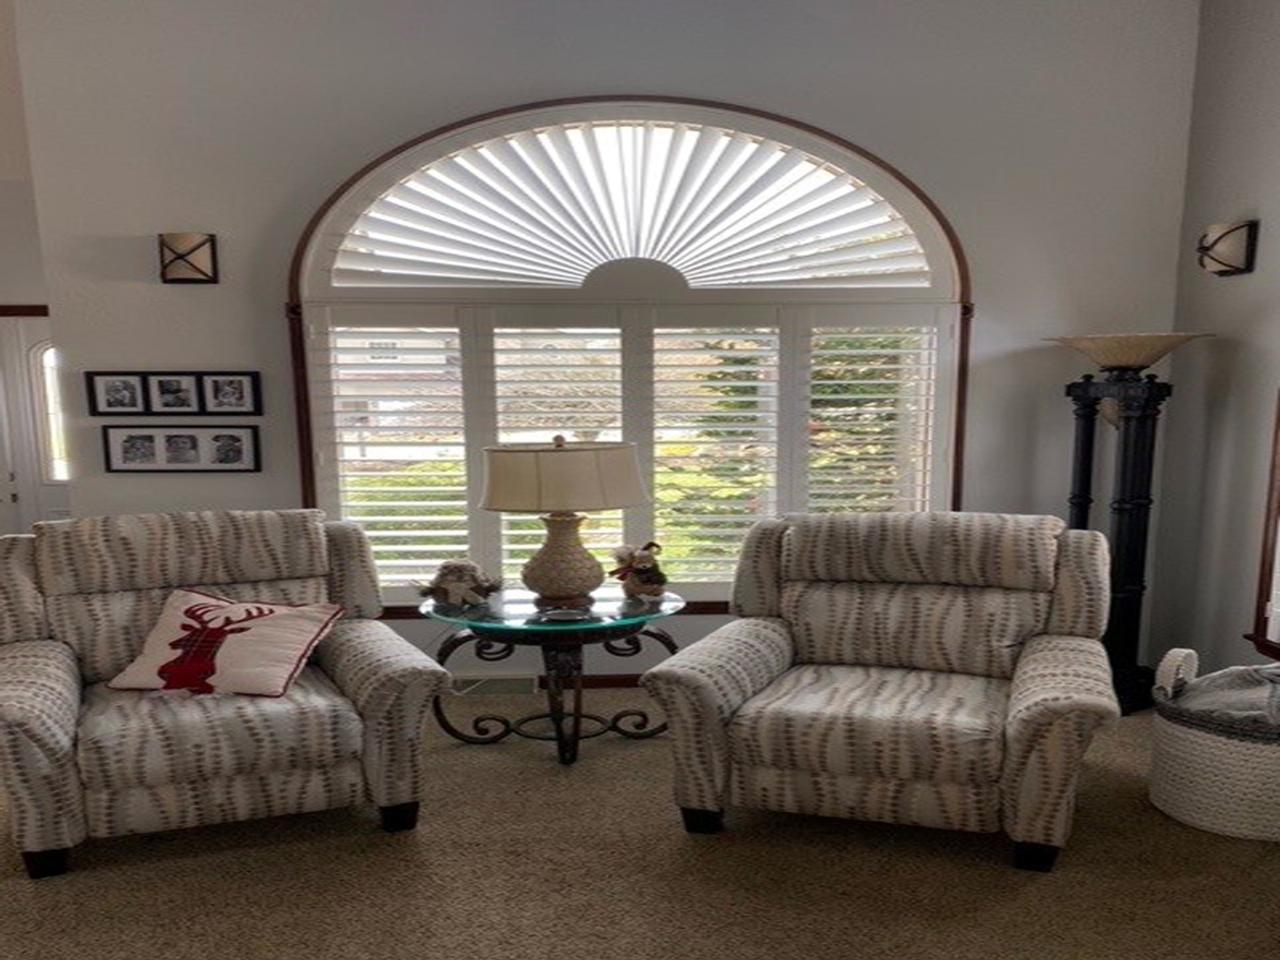 Arched window with sunburst and shutters